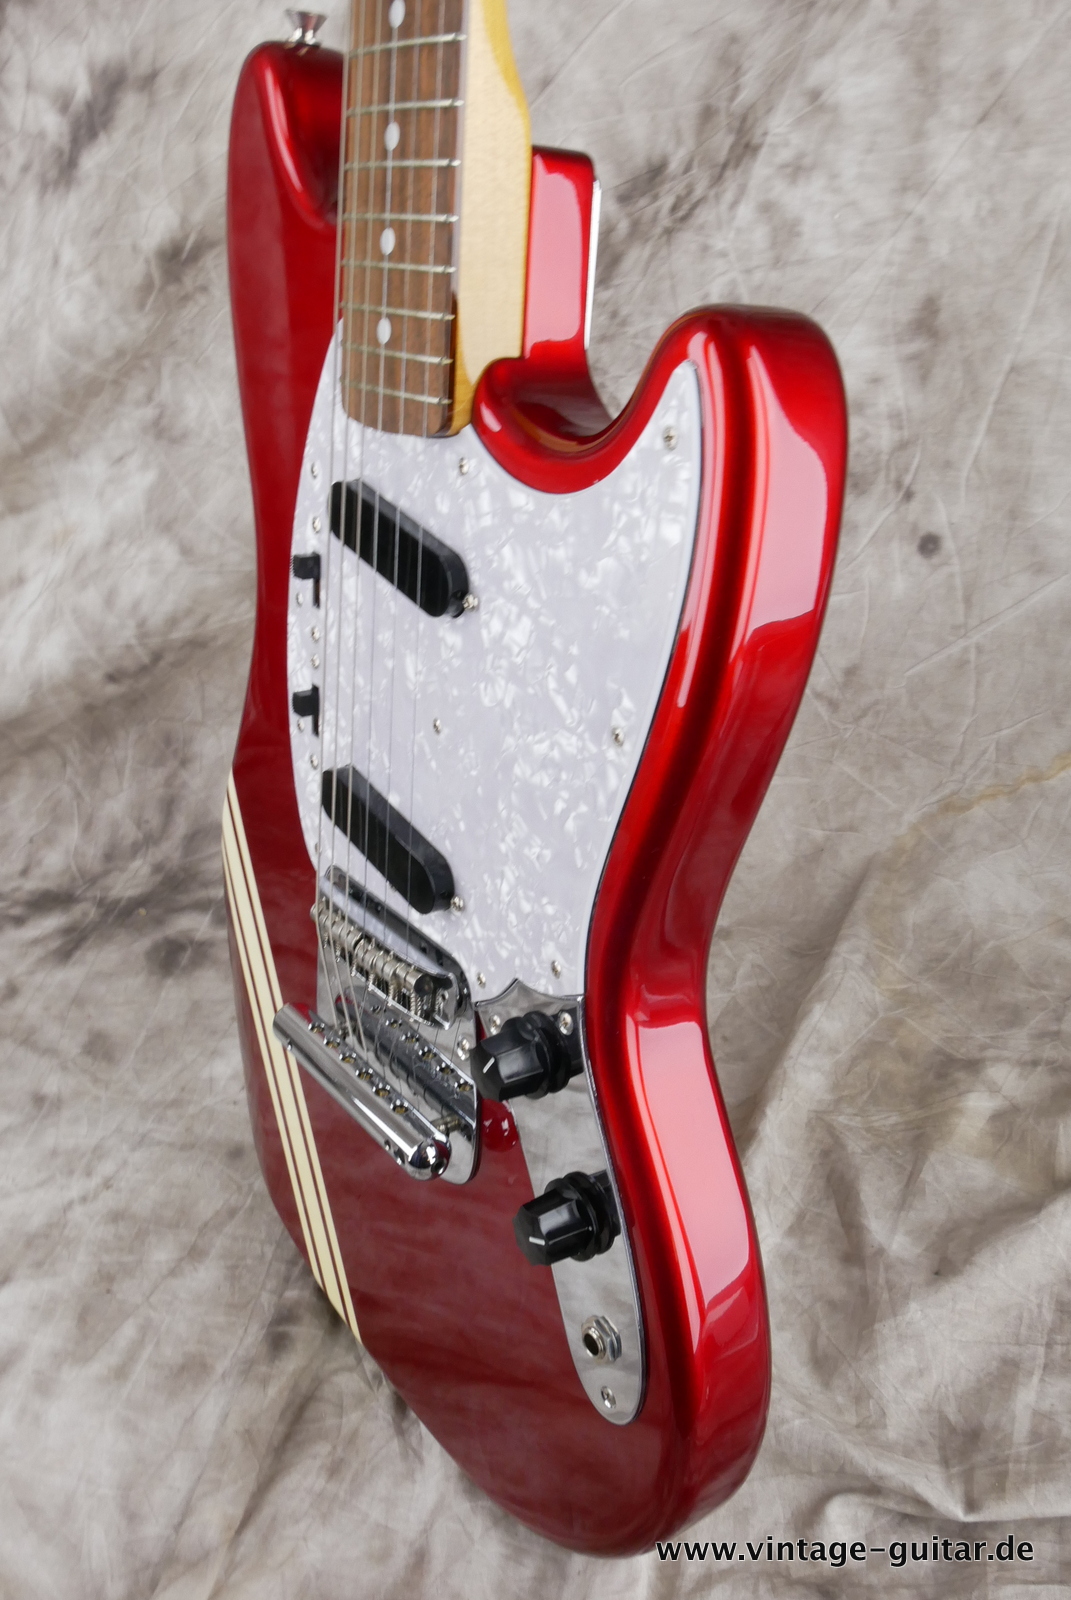 Fender_Mustang_competition_70s_RI_candy_apple_red_Japan_2002-006.JPG